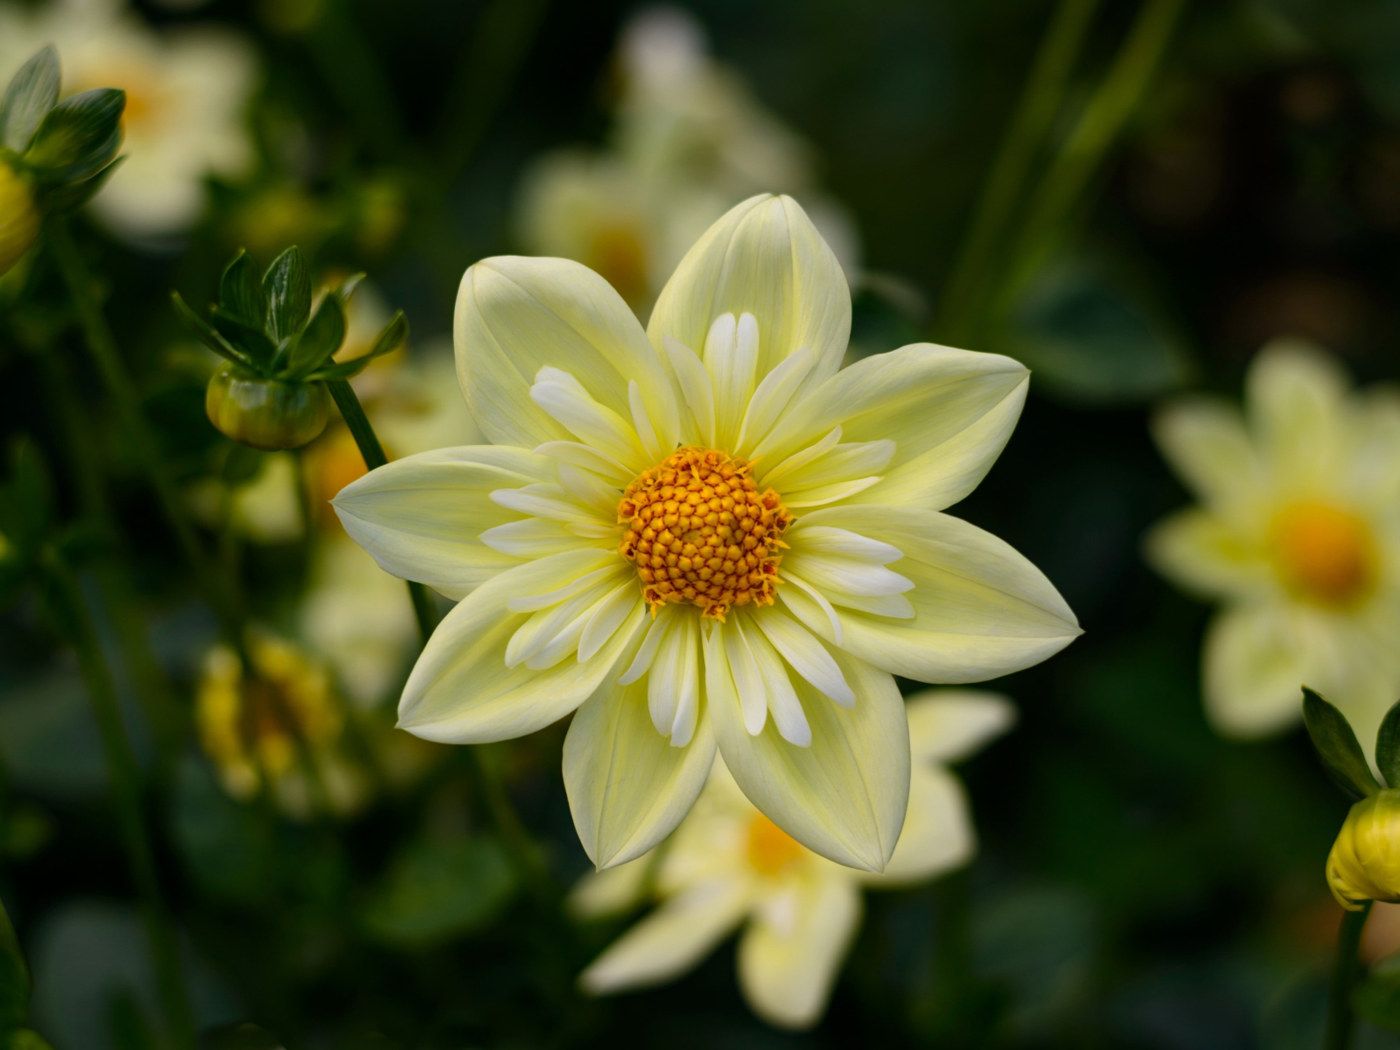 Dahlia Yellow Flowers High Quality Flower Wallpaper For Desktop Computers HD Wallpaper For 4k Ultra HD Tv 3840×2400 • Wallpaper For You